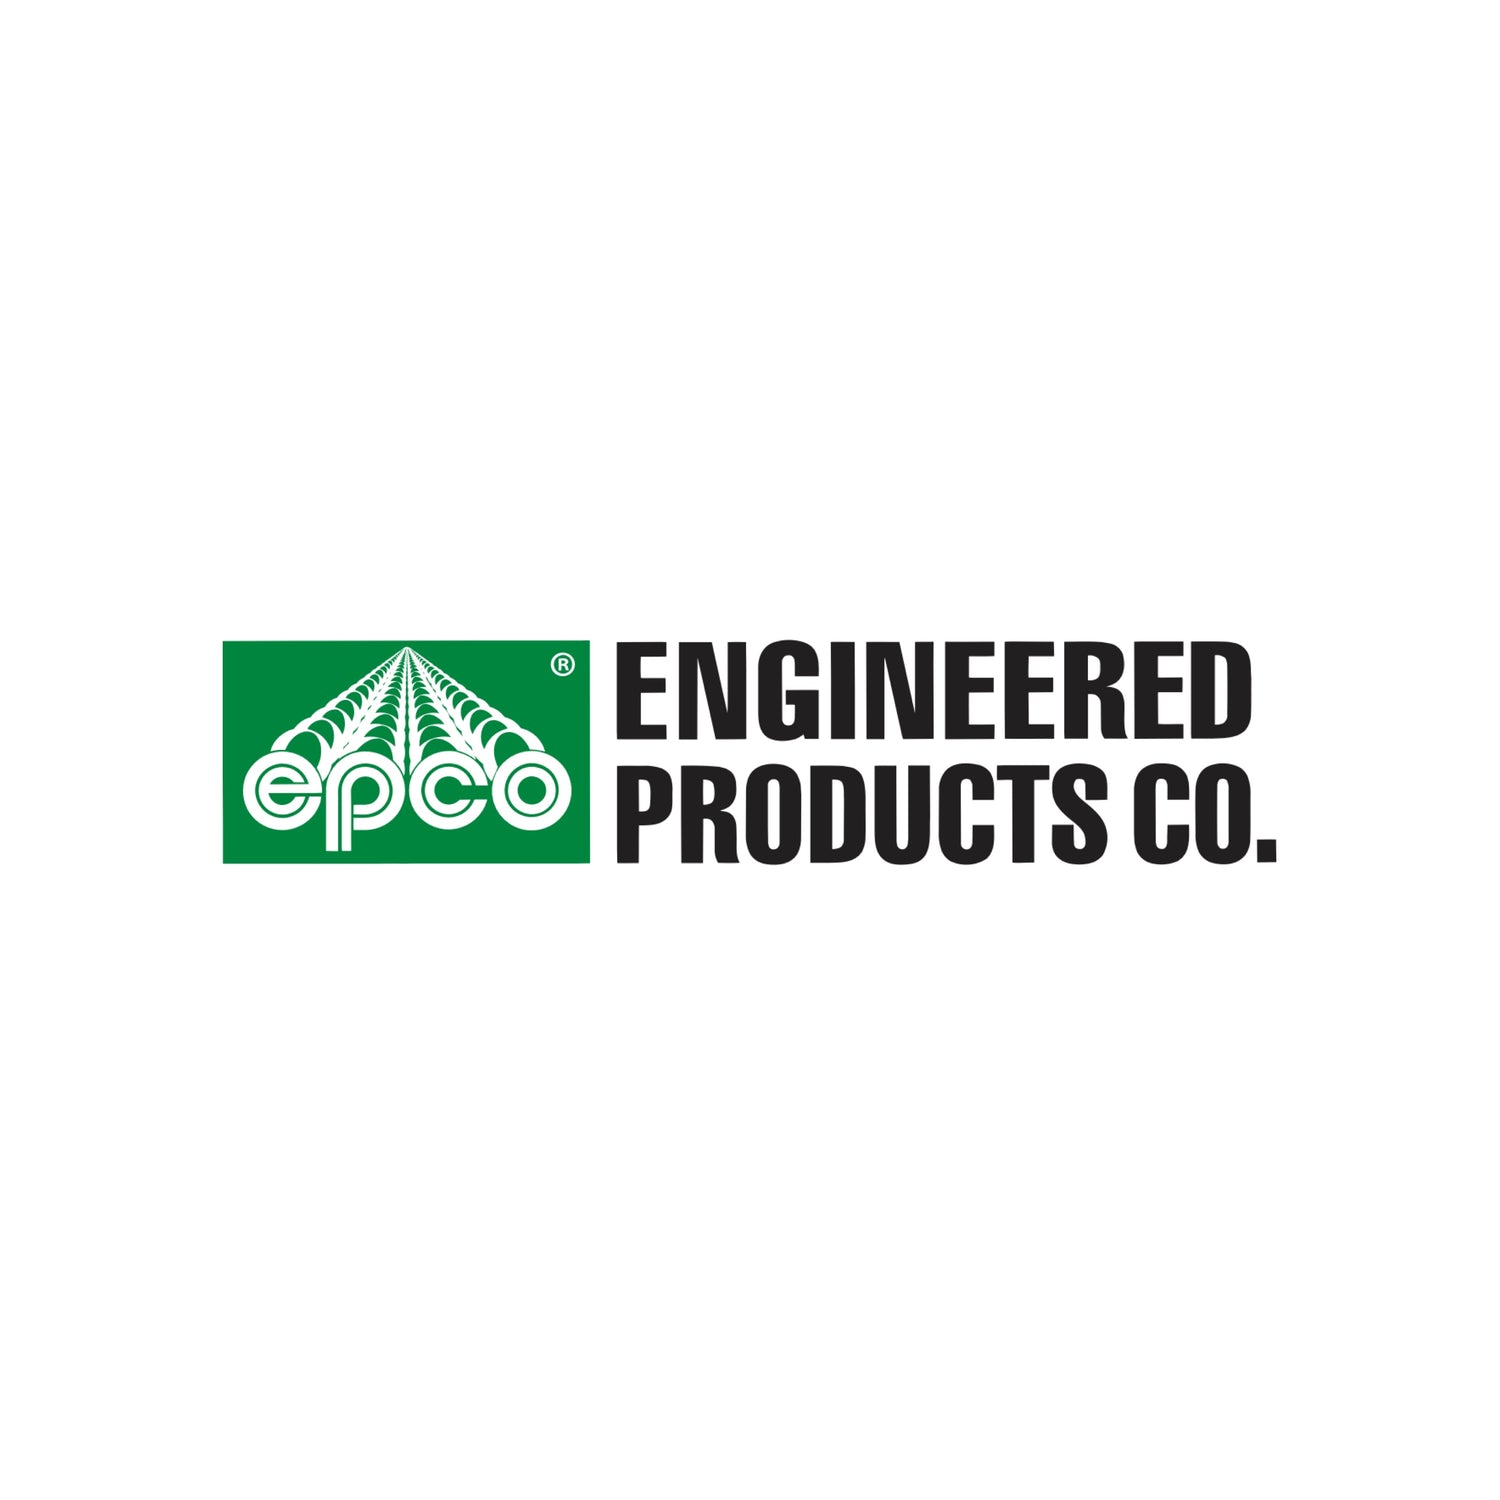 ENGINEERED PRODUCTS